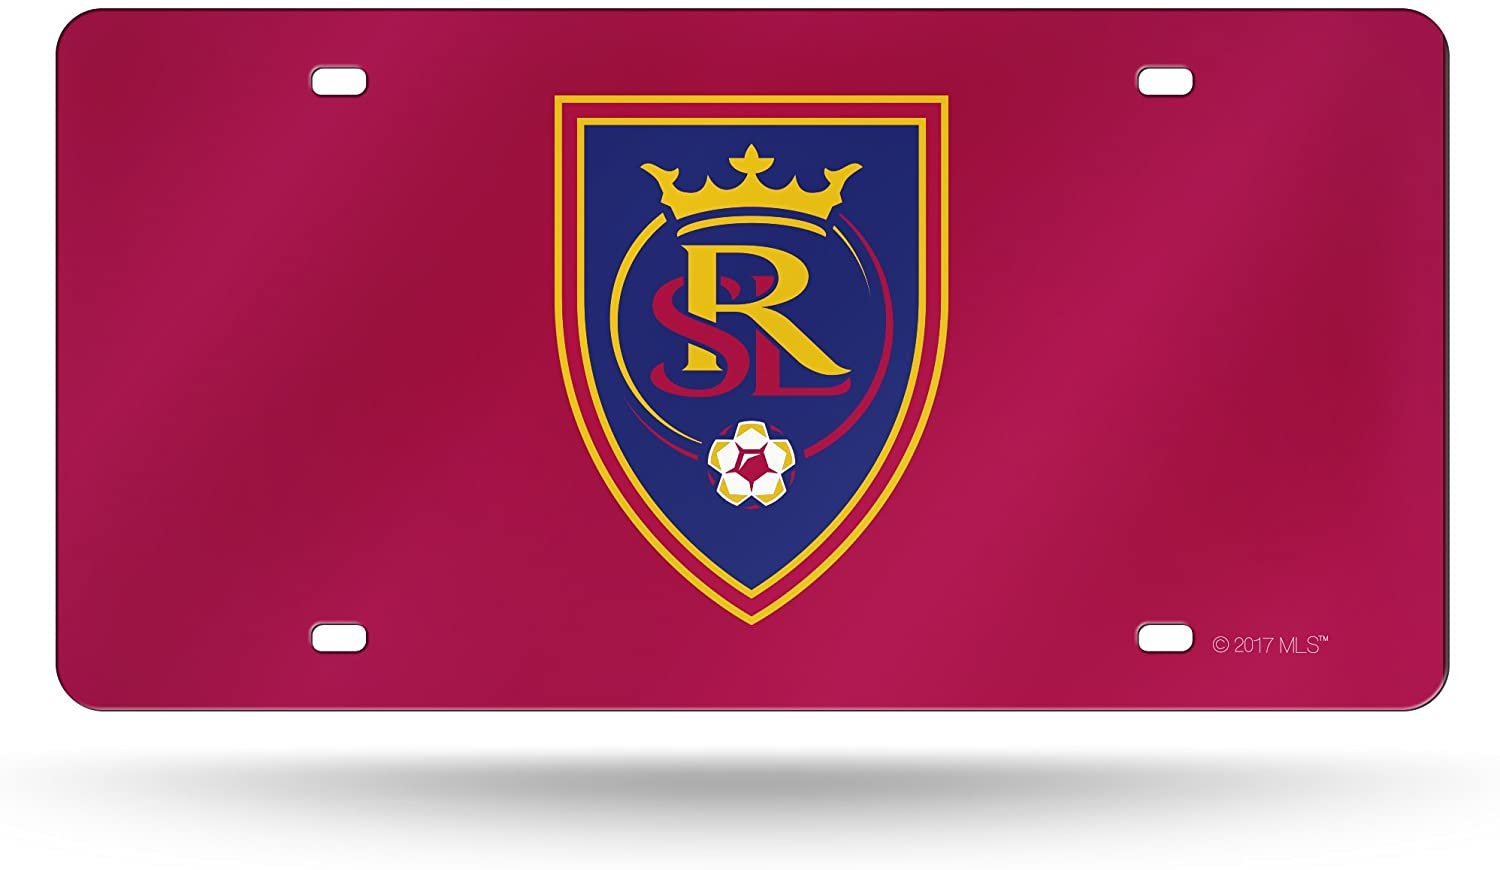 Real Salt Lake MLS Premium Laser Cut Tag License Plate, Red Mirrored Acrylic Inlaid, 12x6 Inch